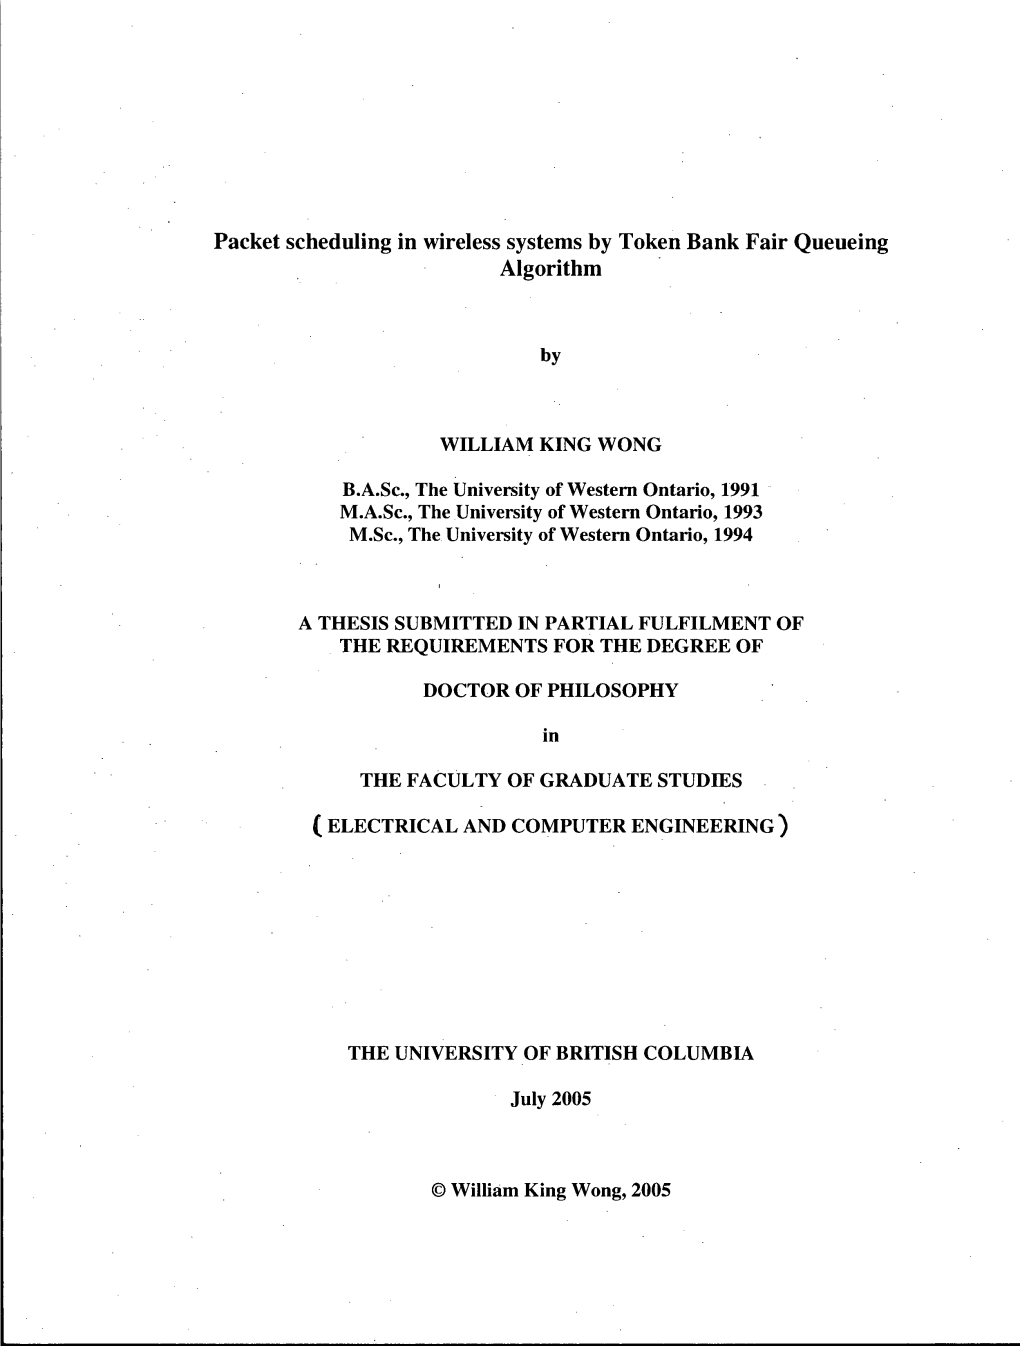 Packet Scheduling in Wireless Systems by Token Bank Fair Queueing Algorithm